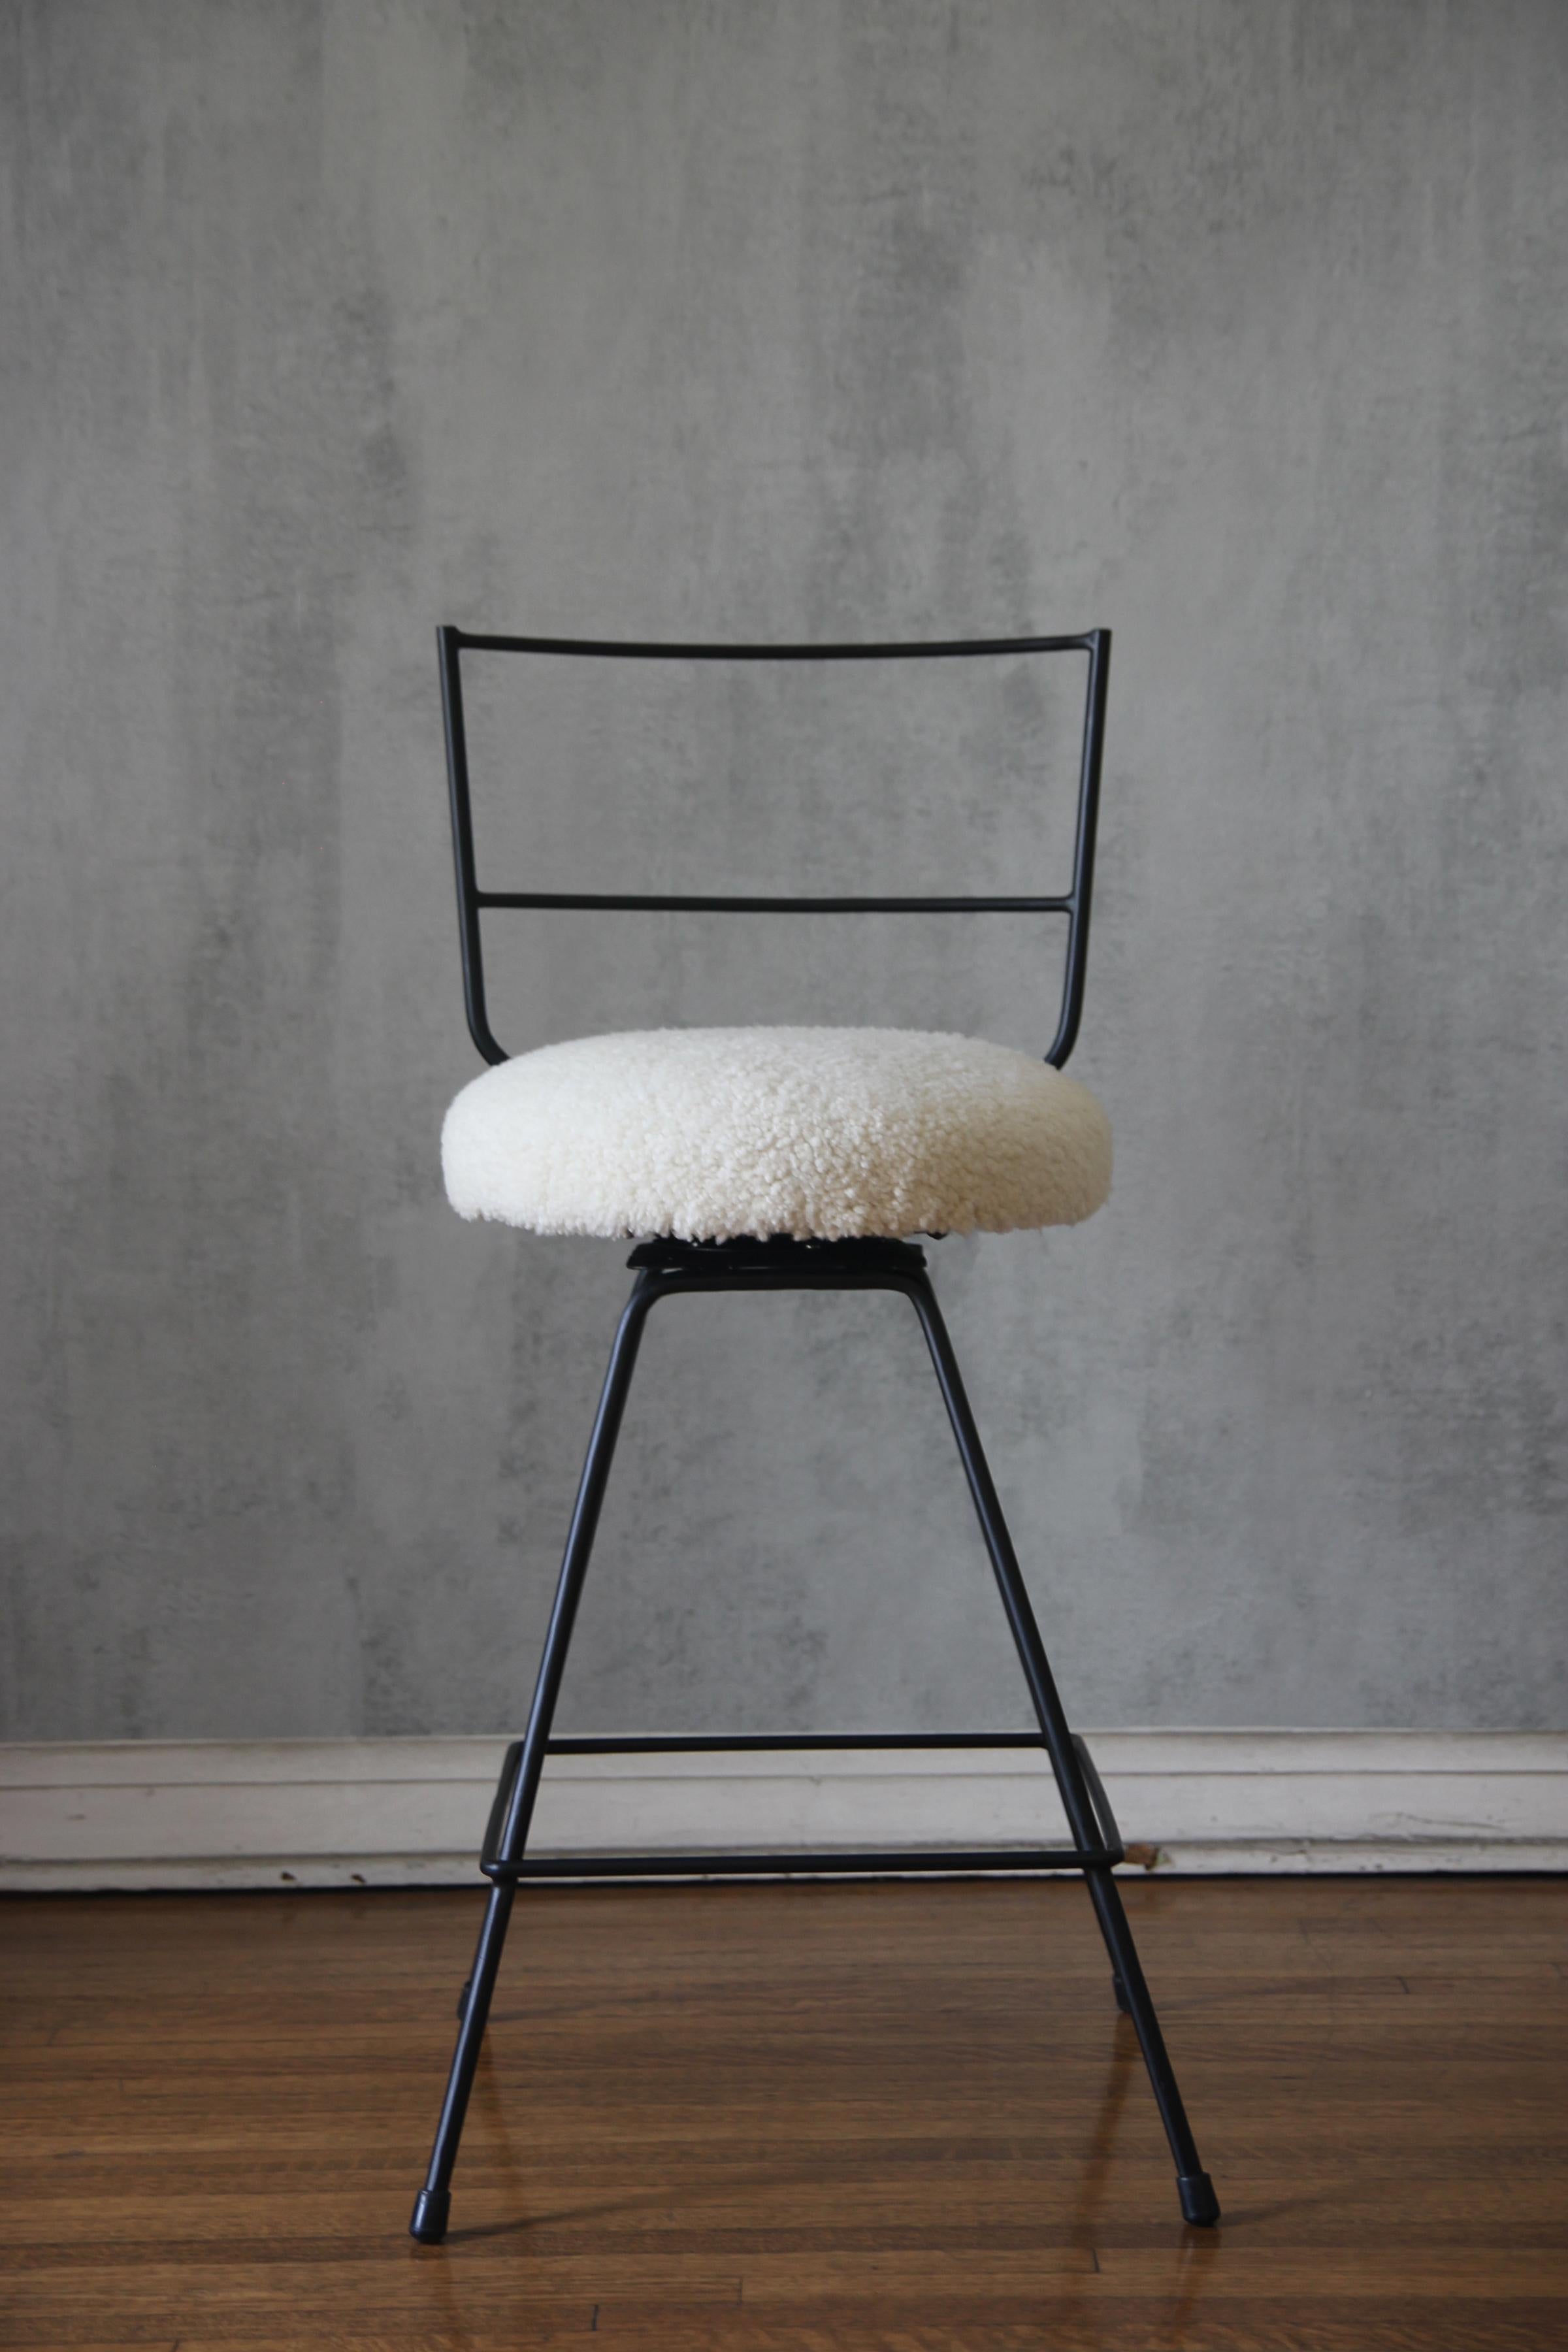 This unique upholstery treatment gives a luxurious feel. Chic combination of slender but sturdy powder coated steel frames contrast nicely with the natural cream shearling upholstery.

The stool is part of our new Understated Design line and can